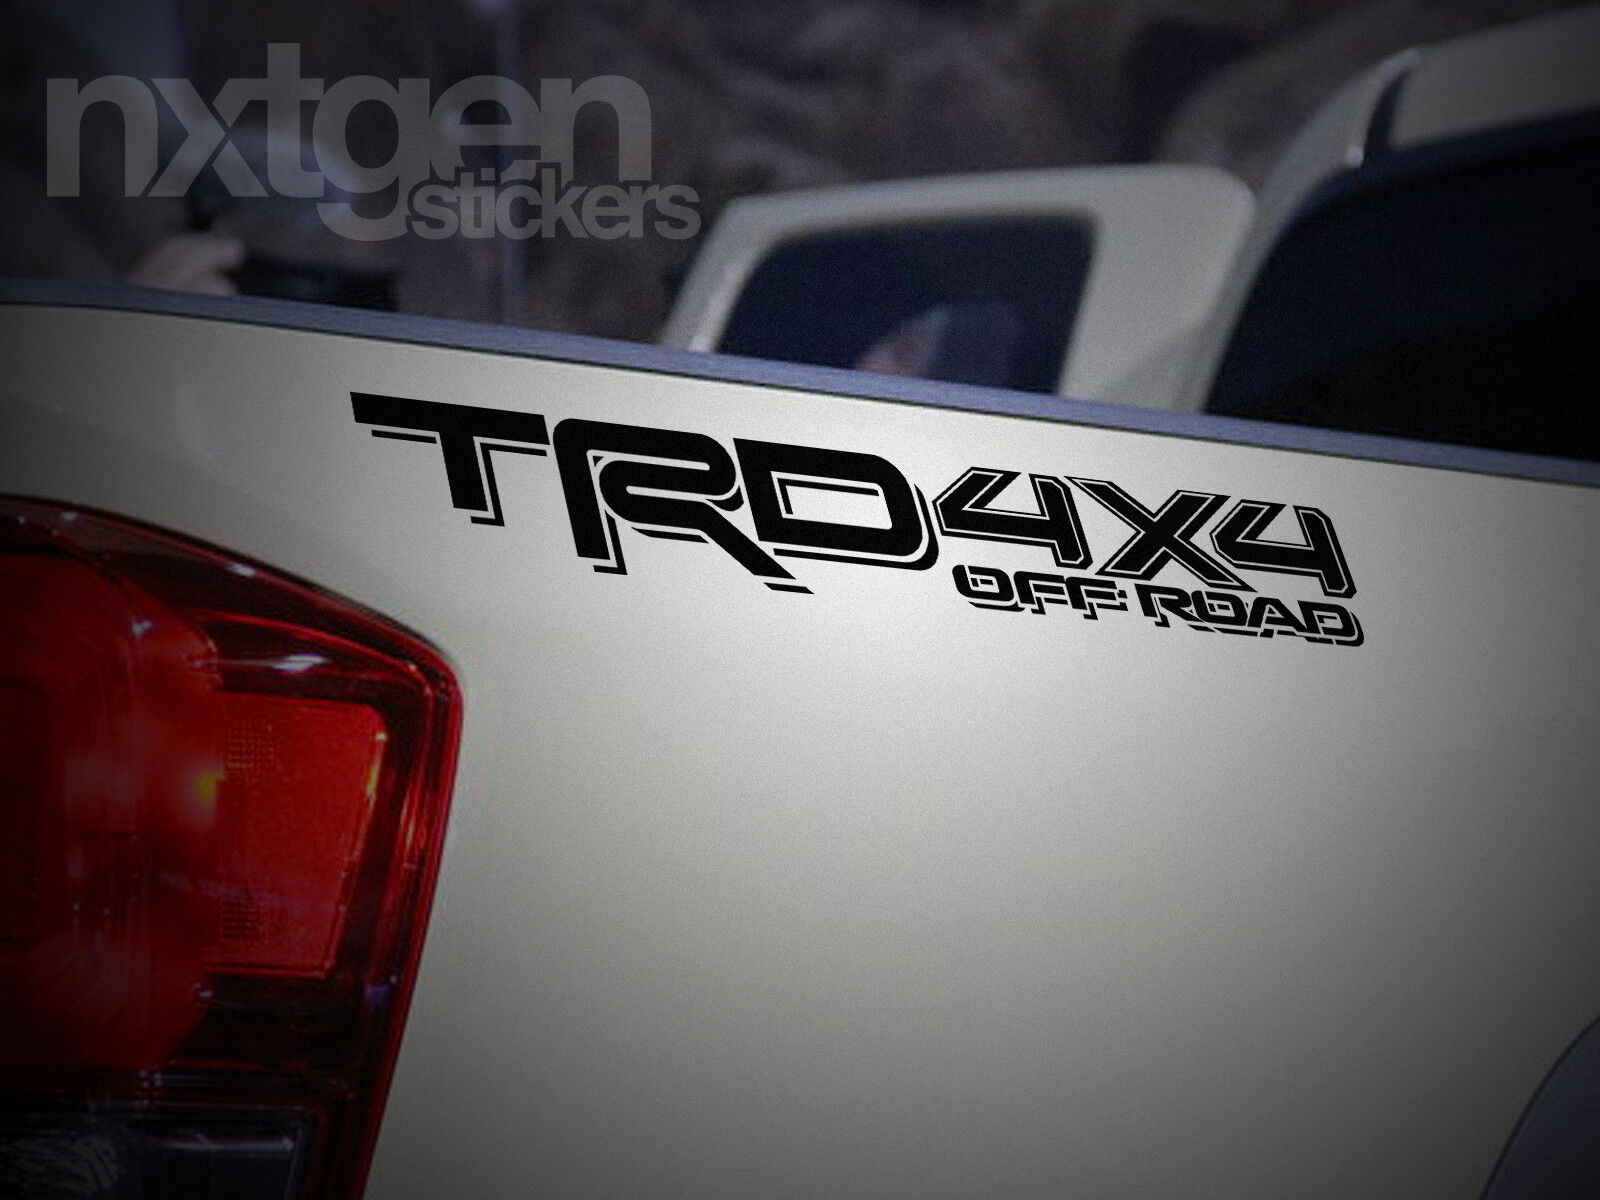 (2x) TRD 4x4 OFF ROAD Toyota Tacoma Tundra 2016 Vinyl Bed Side Decals Stickers